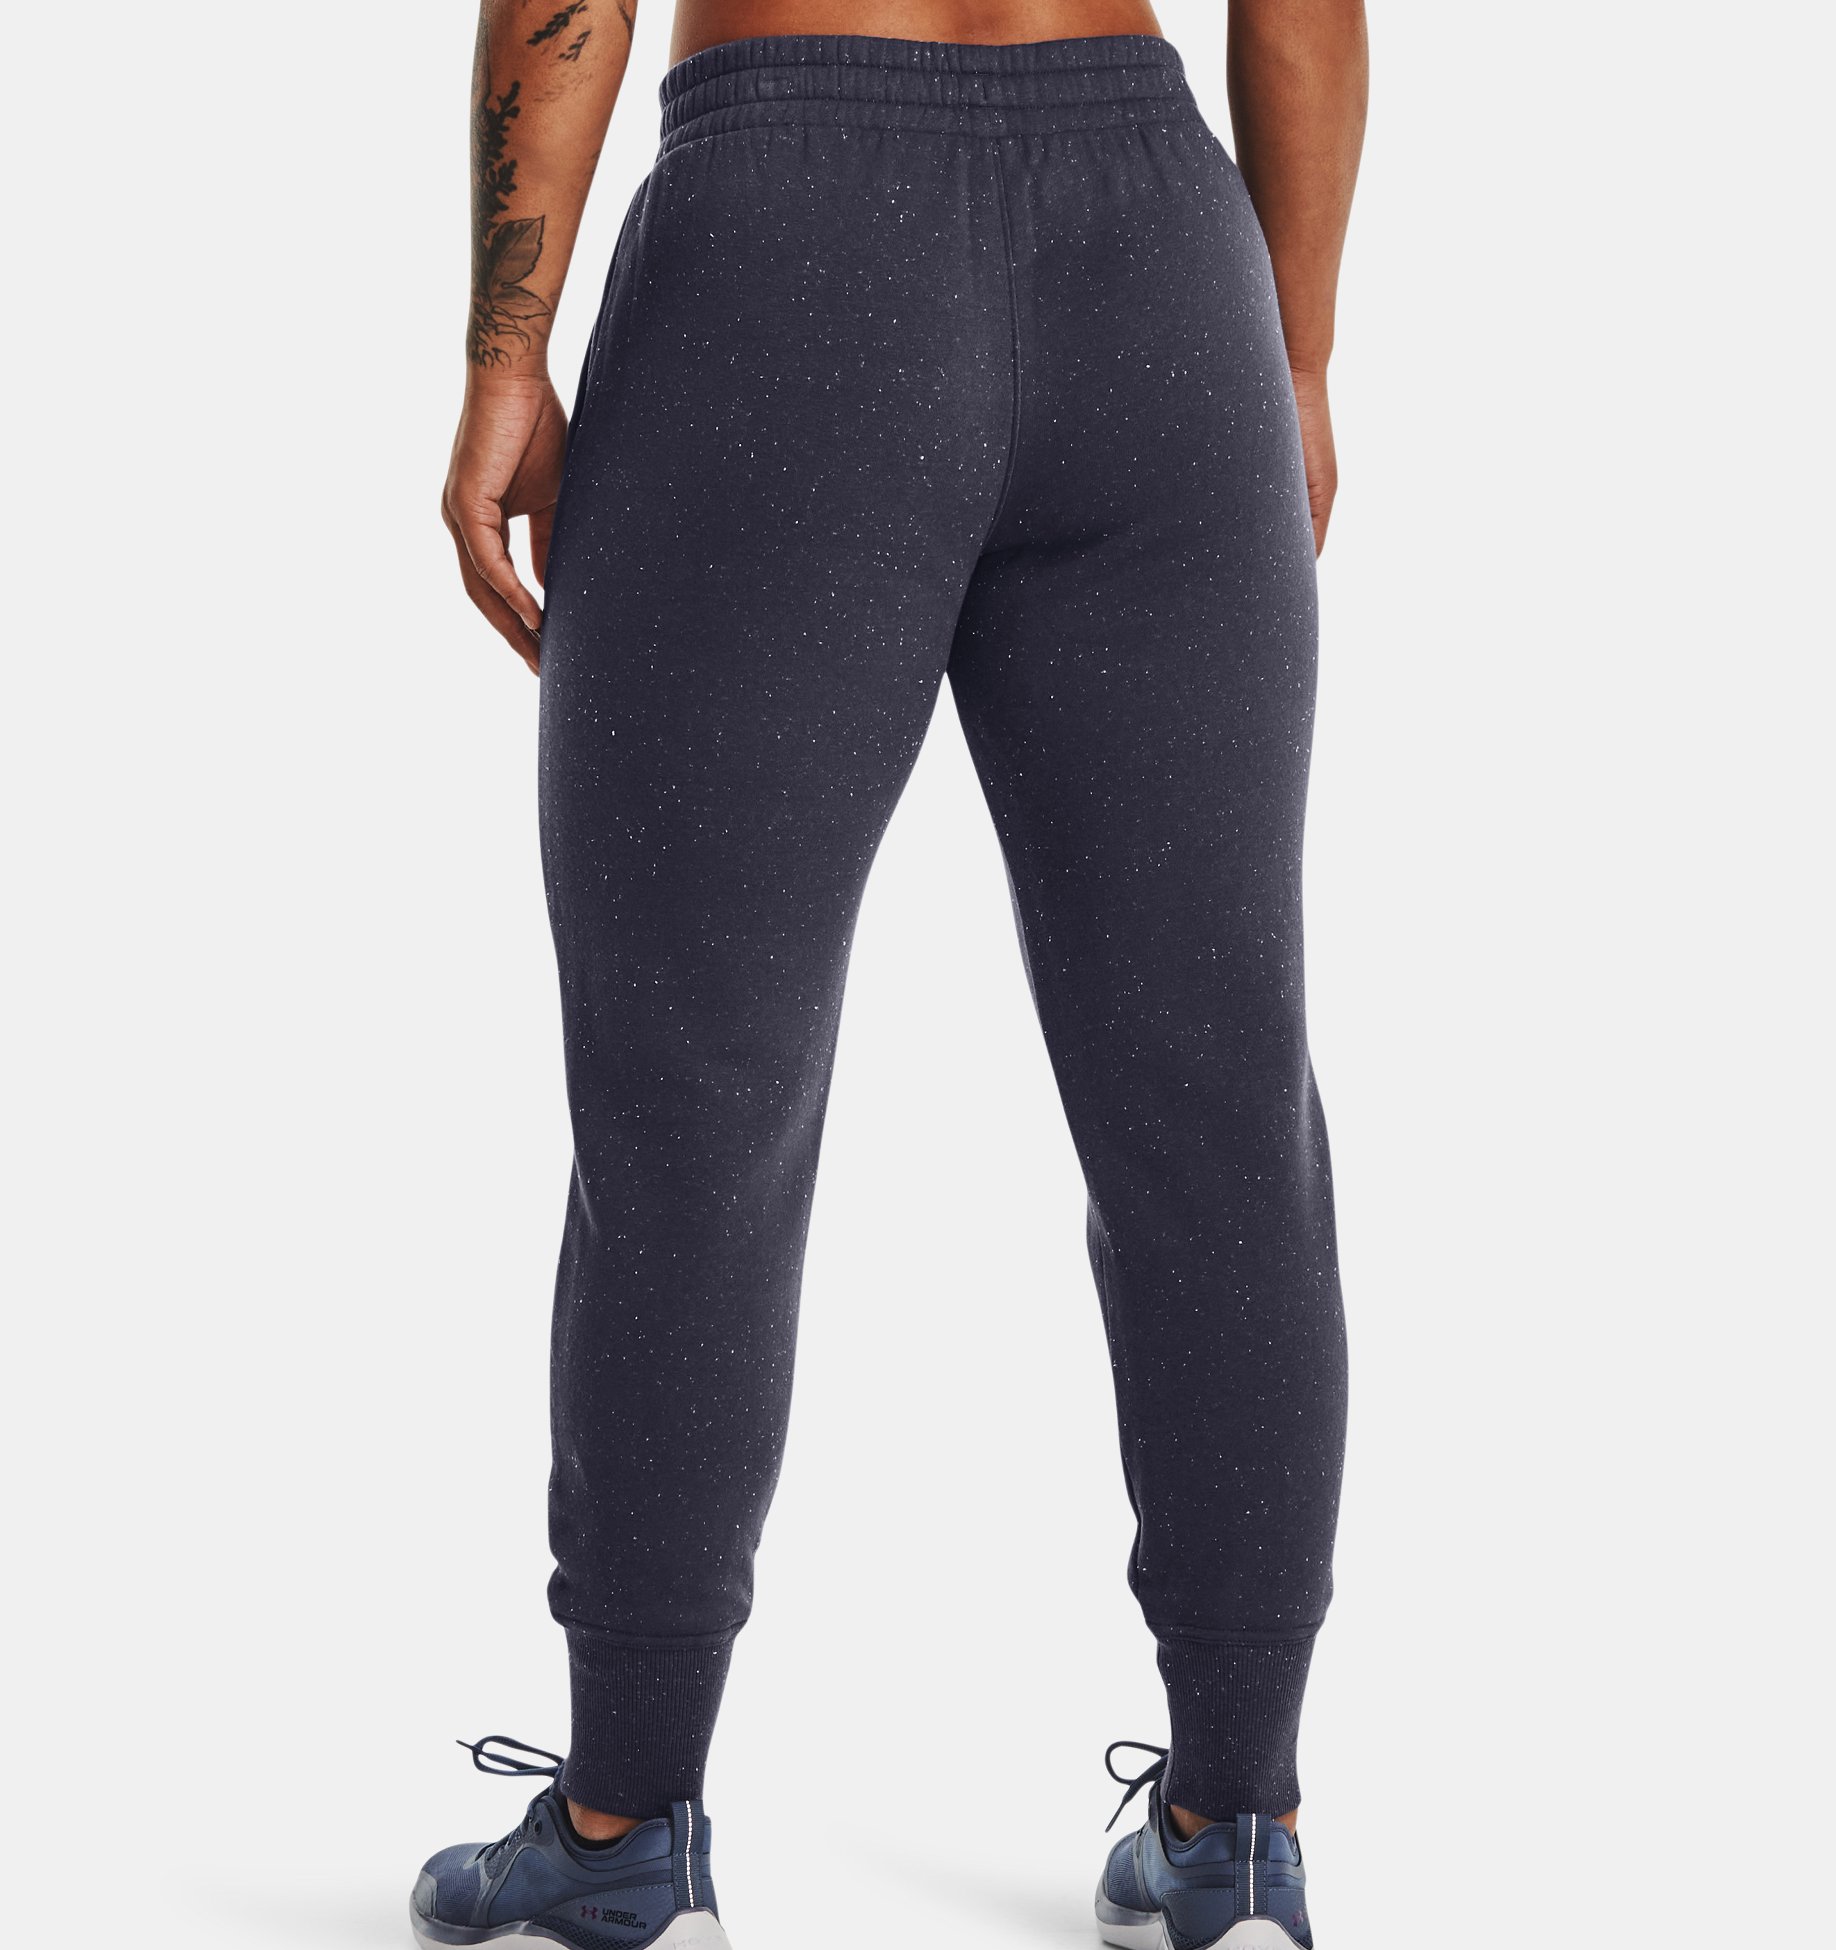 Save 46% gym and workout clothes gym and workout clothes Under Armour Activewear Womens Activewear Under Armour Rival Fleece Pants Black 